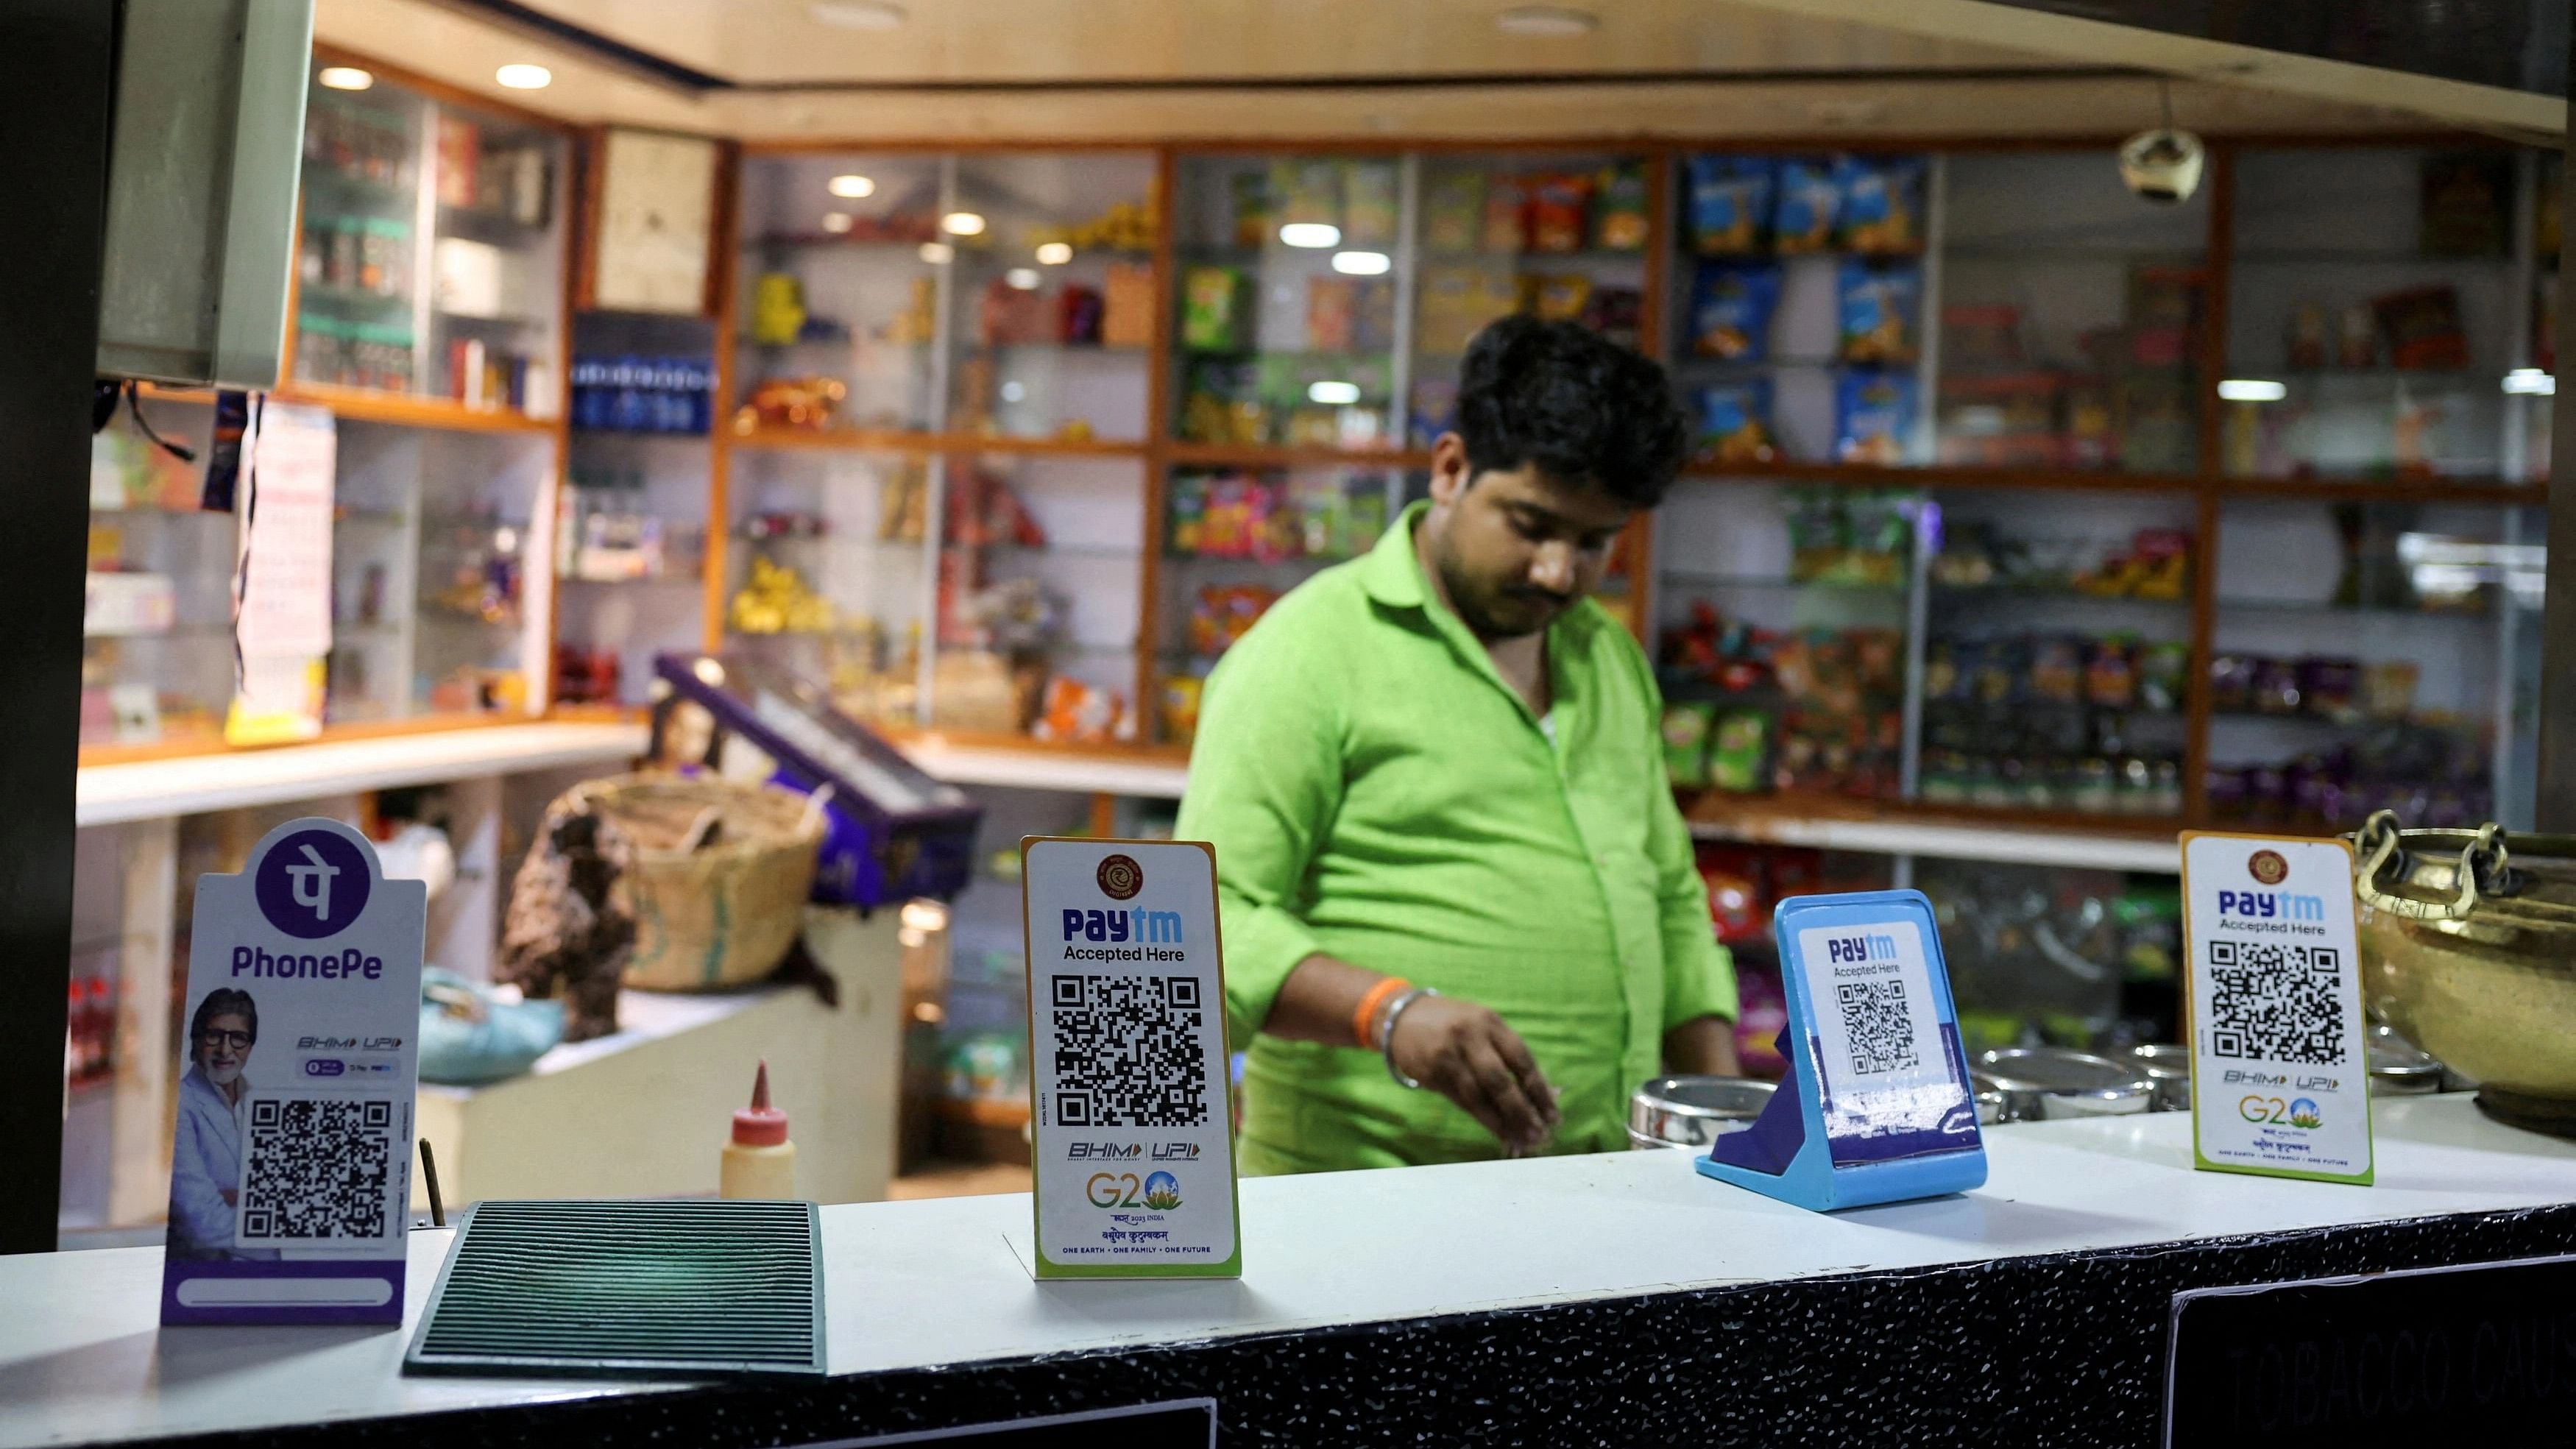 <div class="paragraphs"><p>QR codes of digital payment firms PhonePe and Paytm are seen on the counter of a grocery store.</p></div>